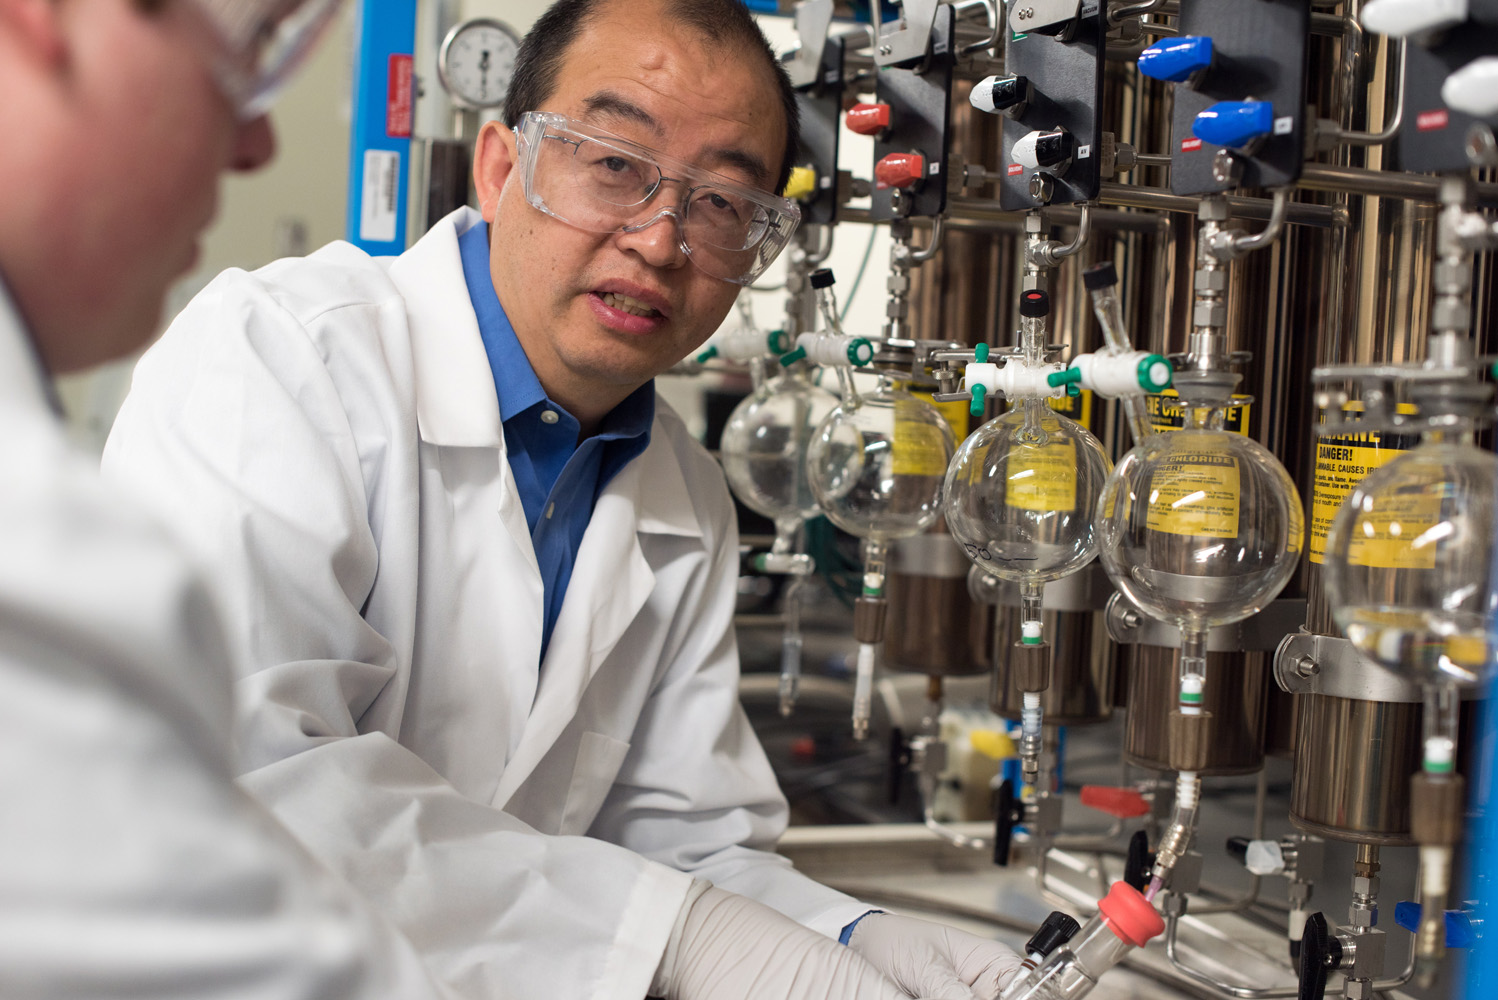 Texas A&amp;M chemist Hongcai Joe Zhou instructs a student as he fills glassware in his lab